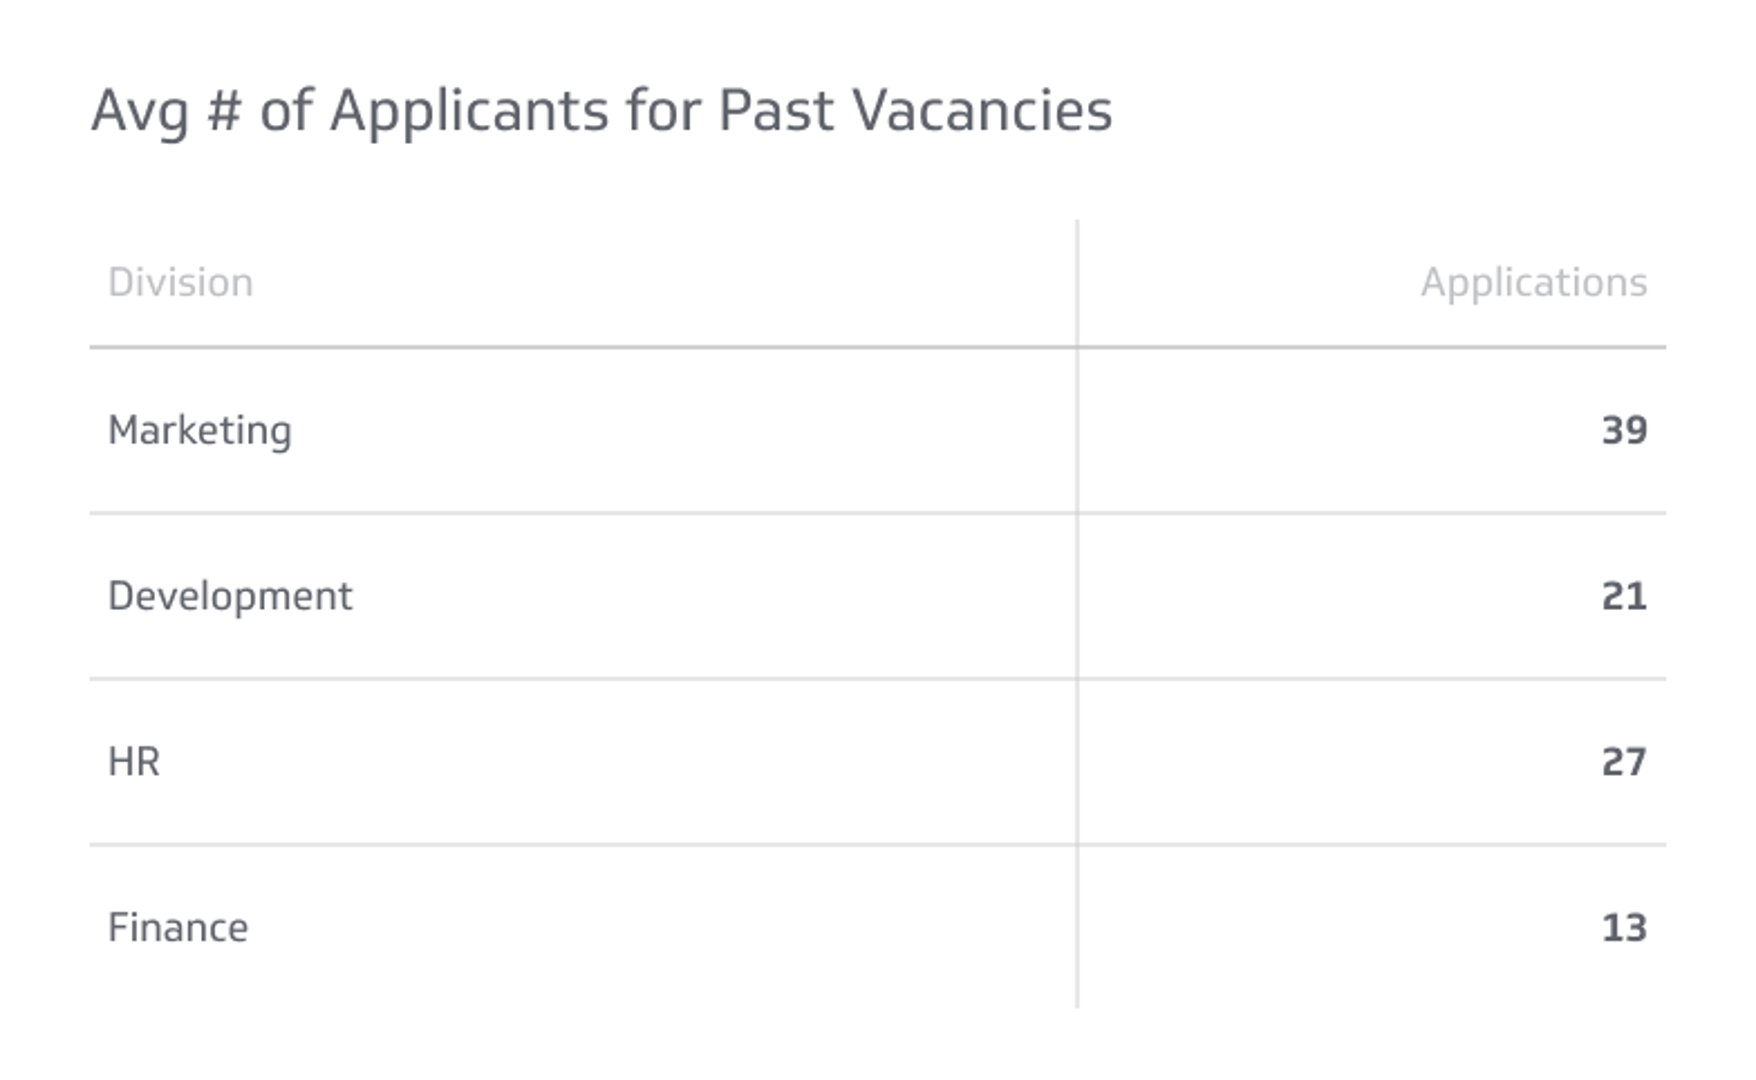 Related KPI Examples - Applications Received per Vacancy Metric